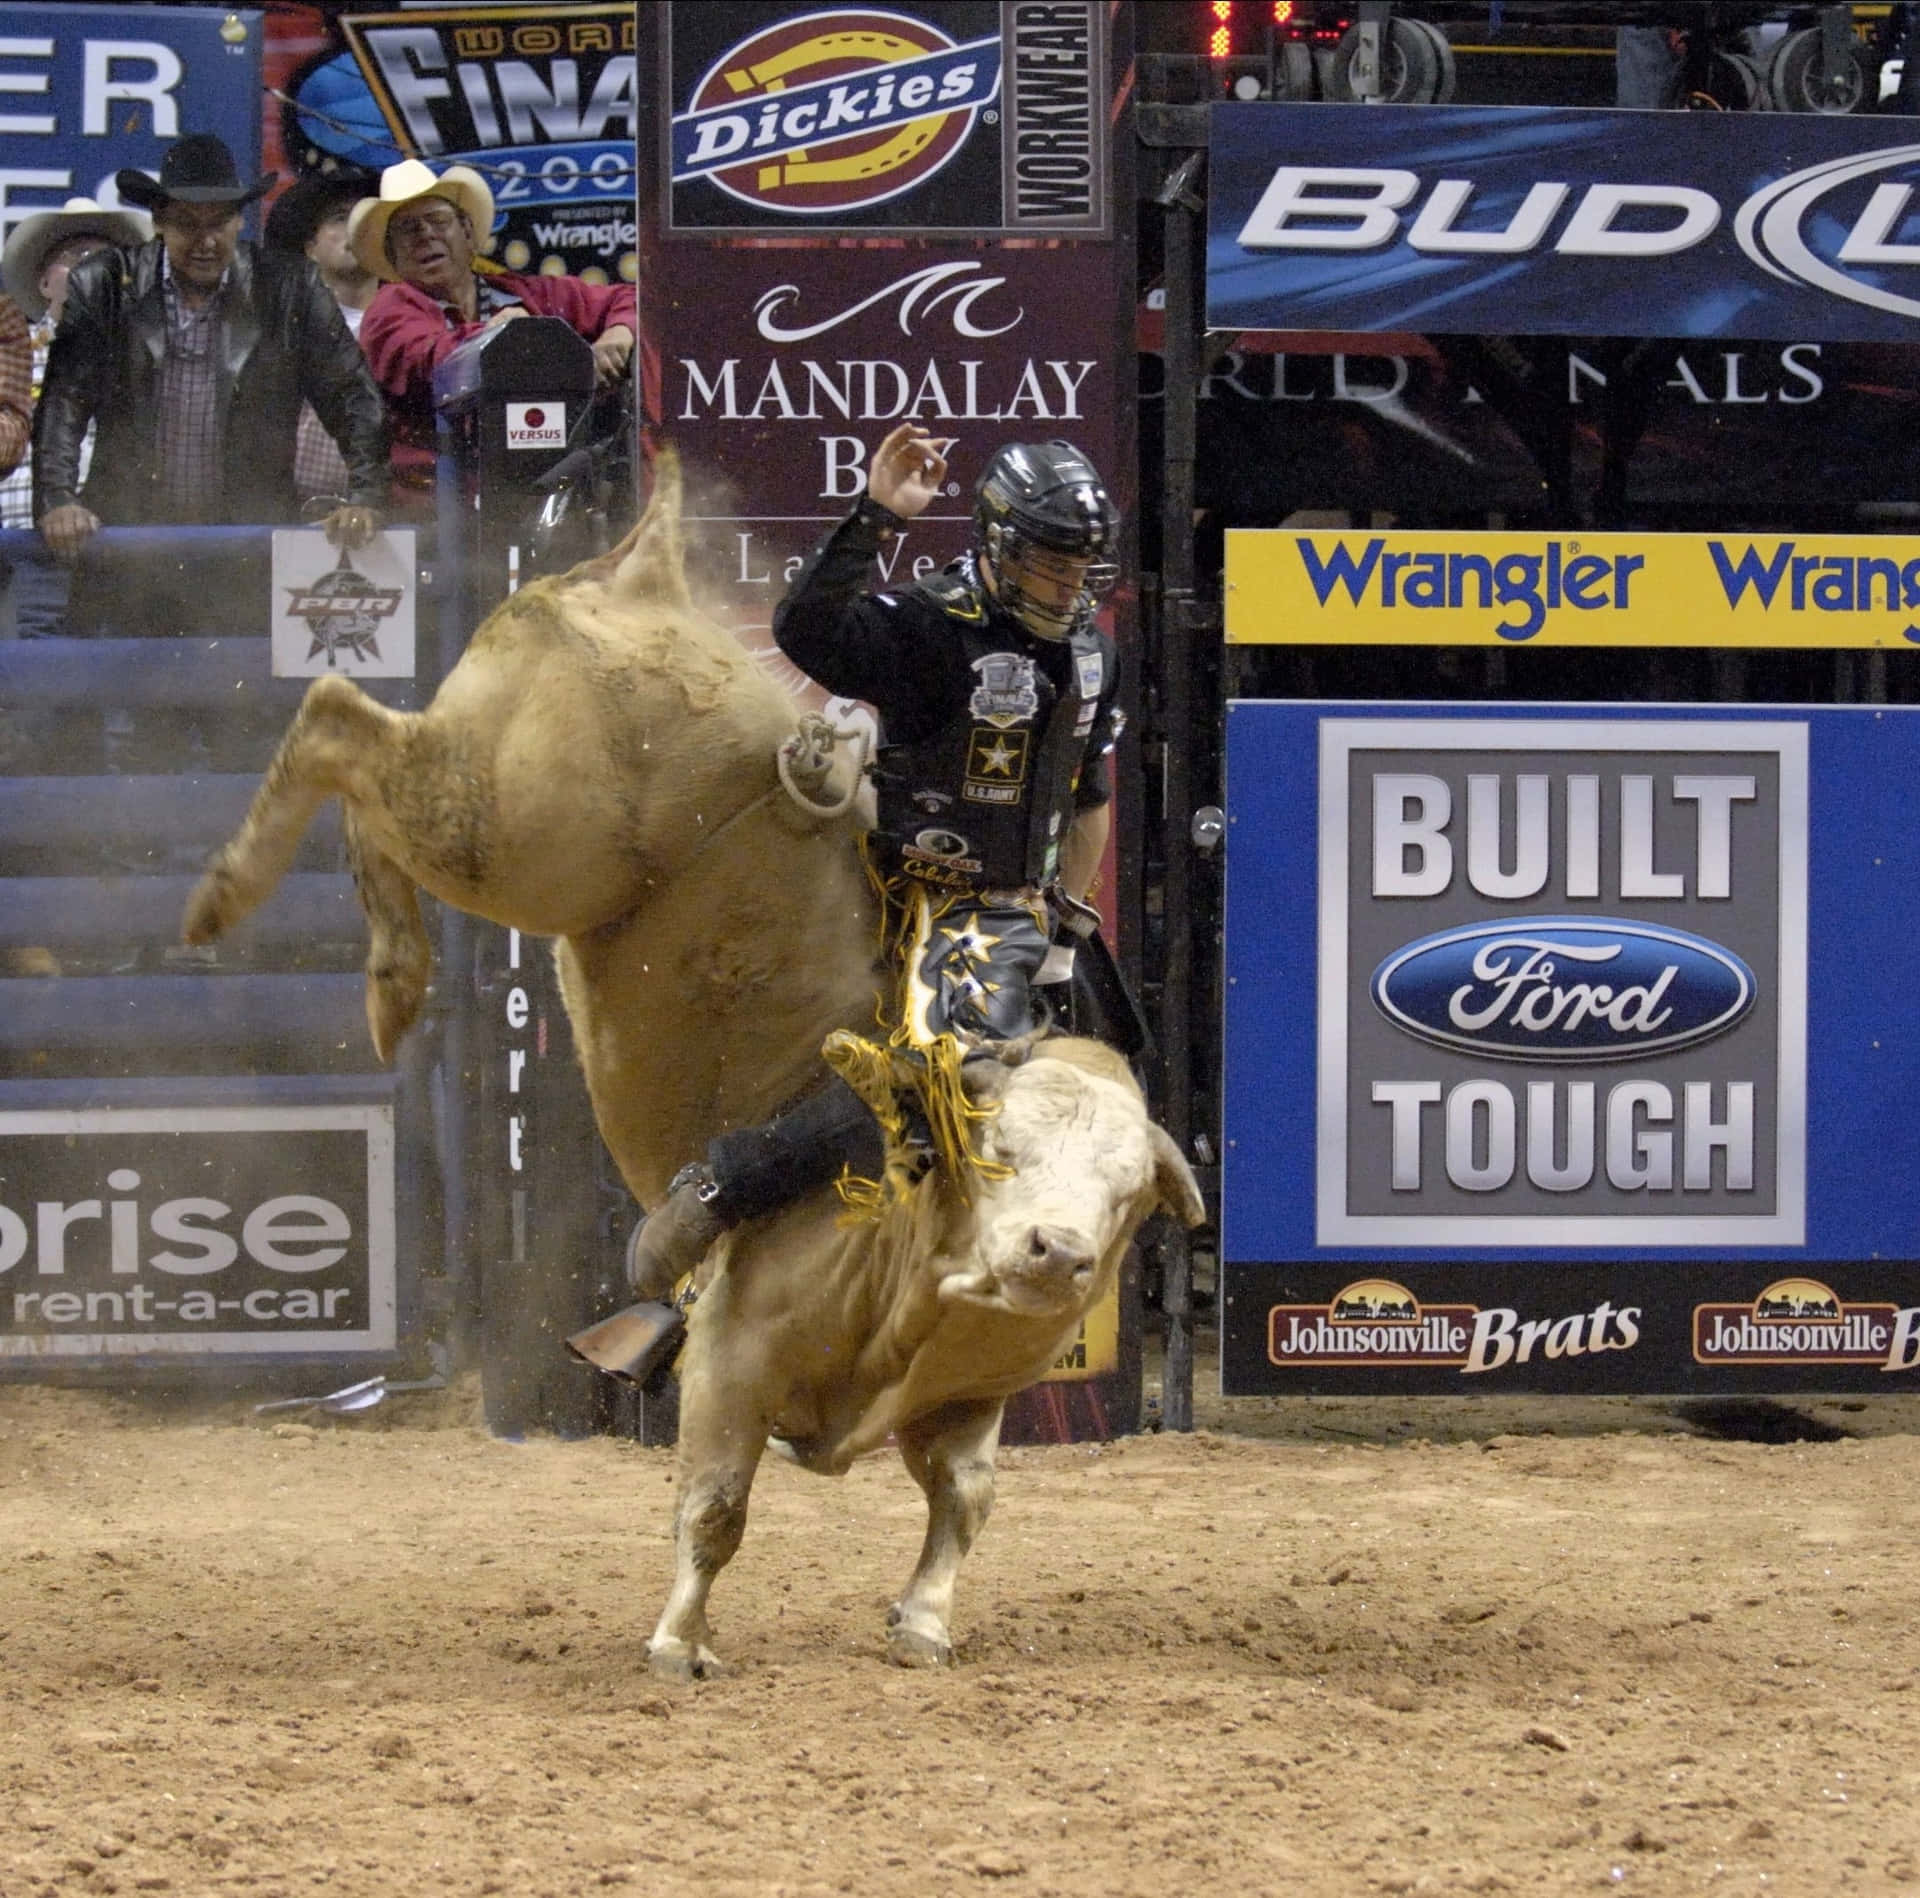 Straddling a Beast: Professional Bull Rider Clings On